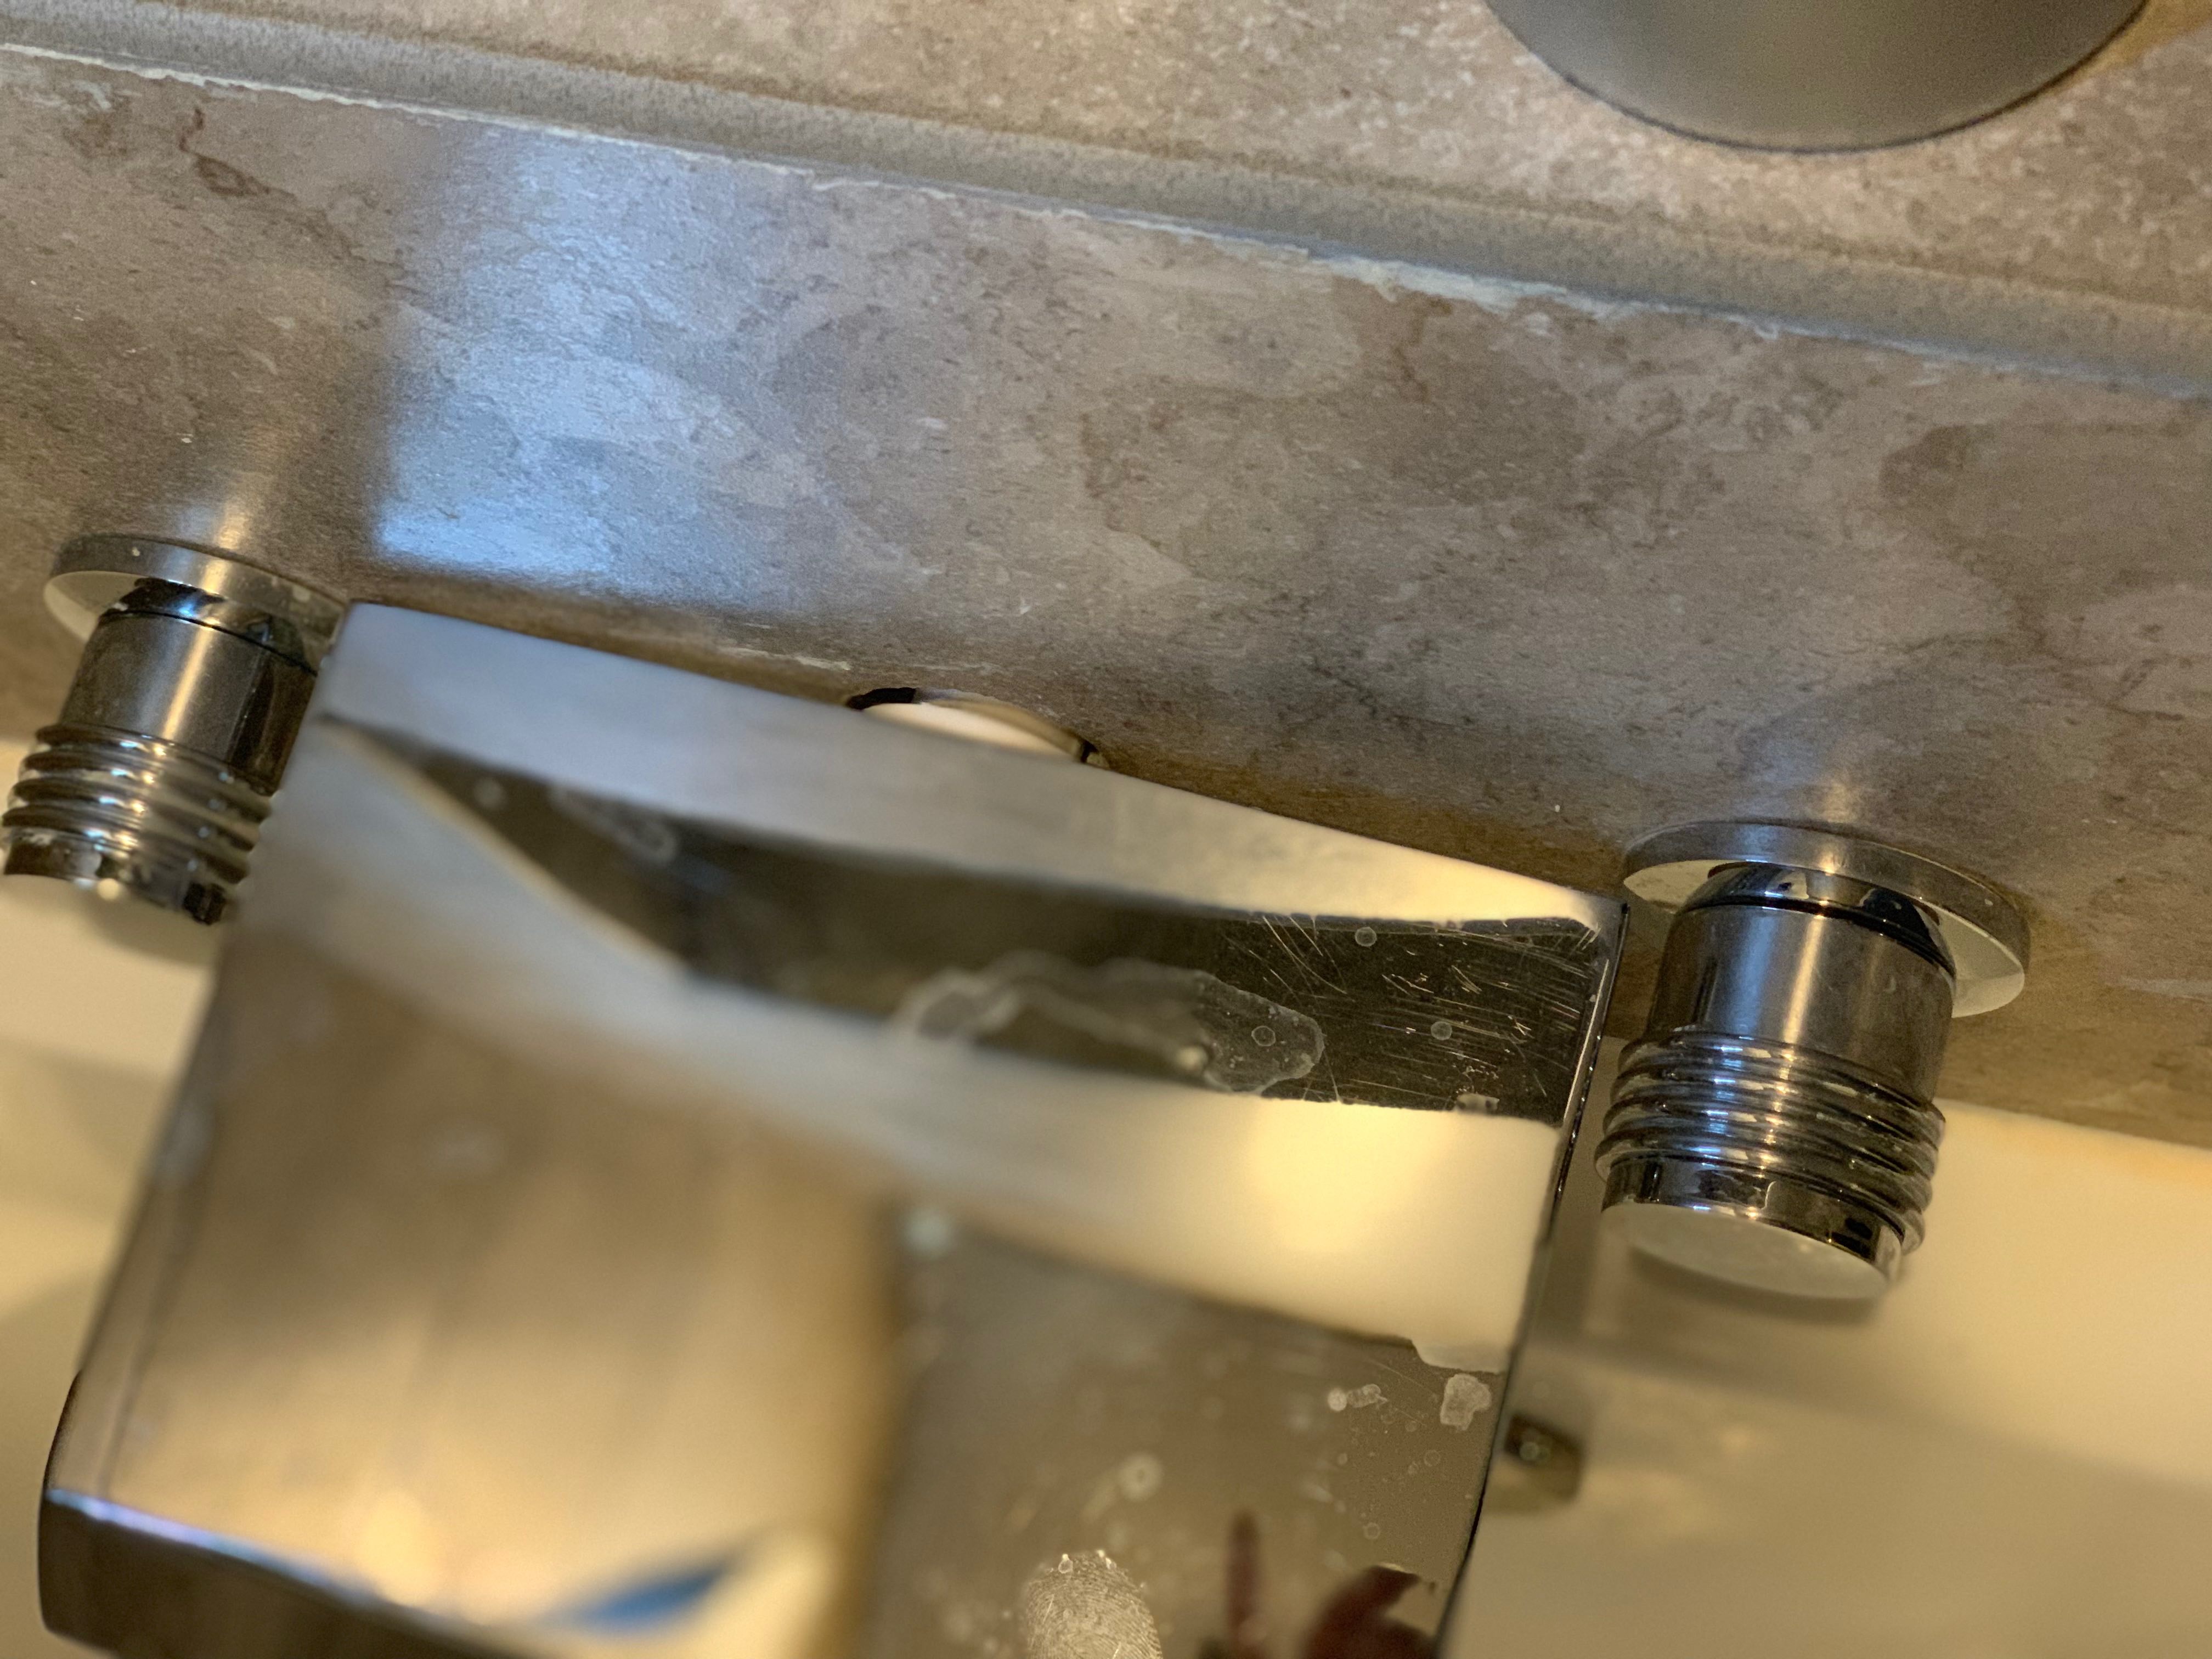 Cracked faucet. Installed incorrect